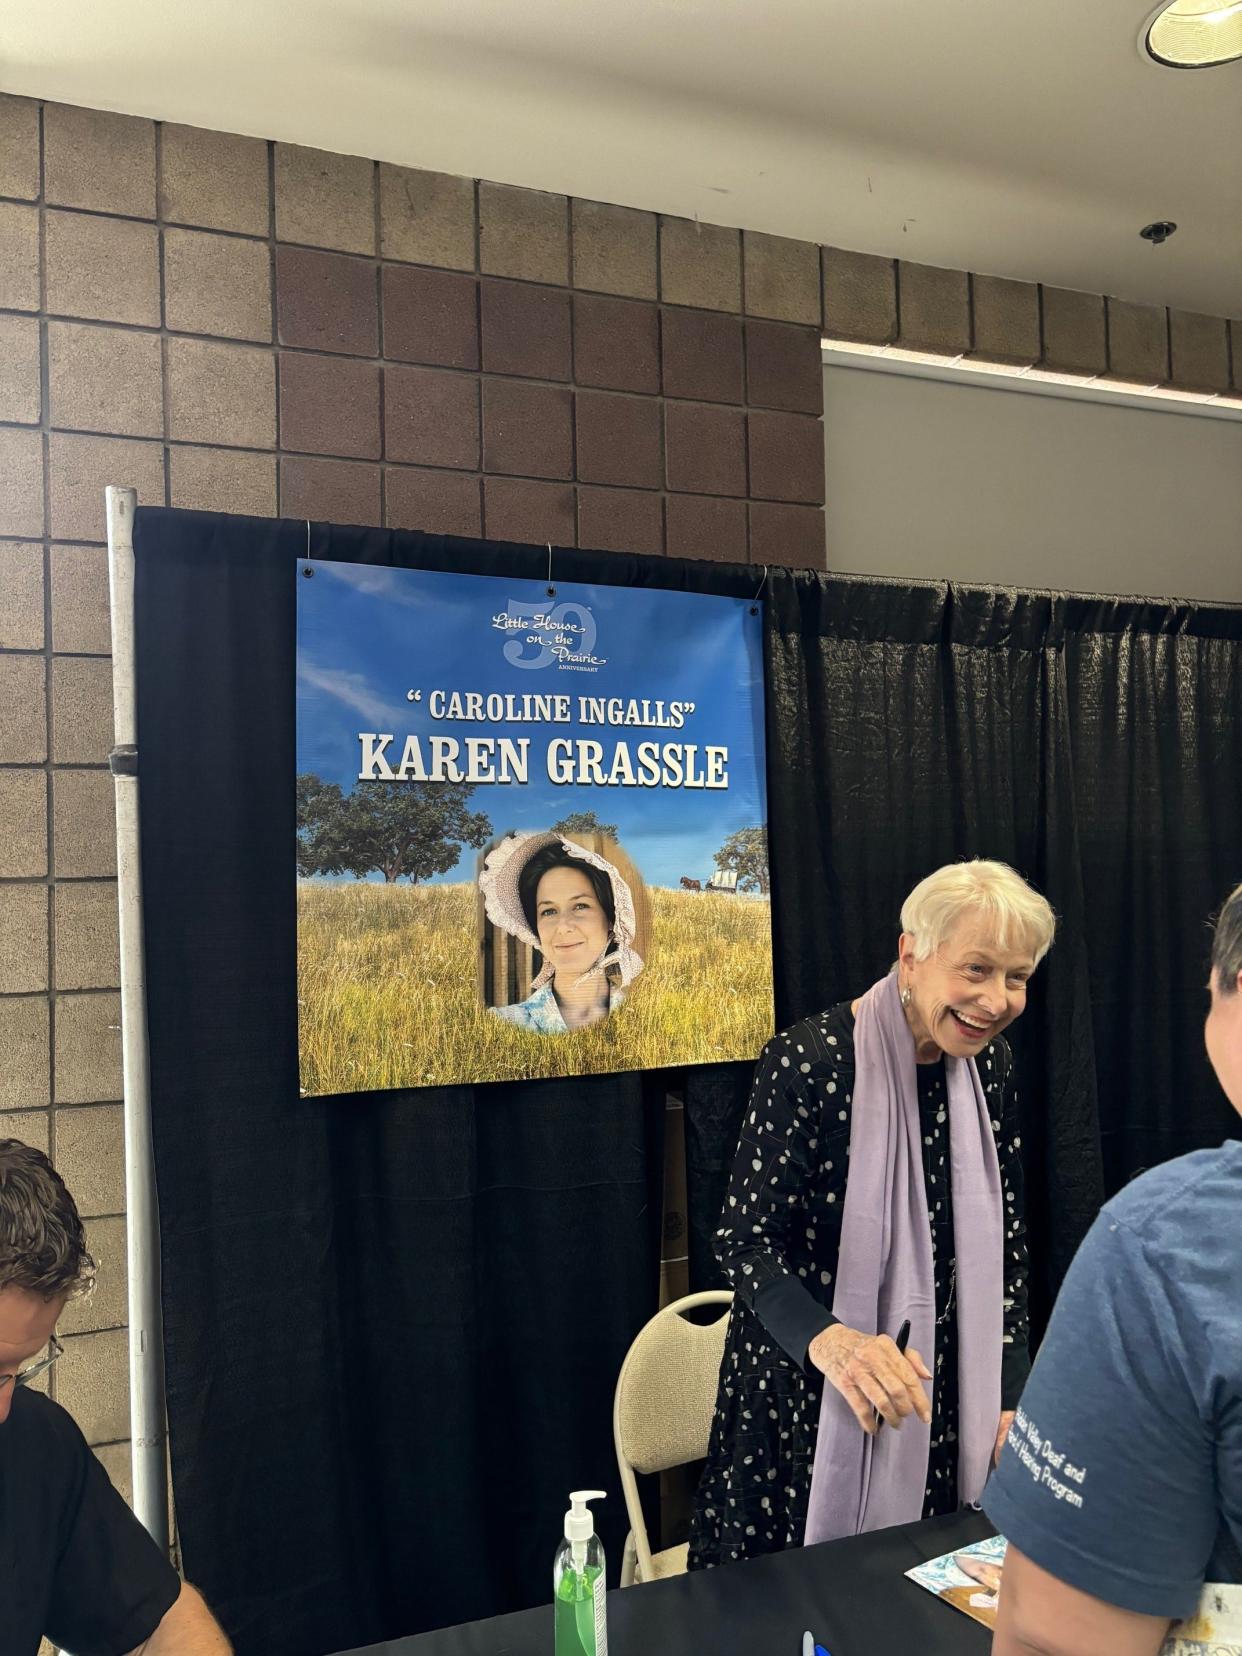 Karen Grassle, who played Caroline Ingalls or "Ma," on "Little House on the Prairie" greeted fans at the Little House on the Prairie Festival on March 23.